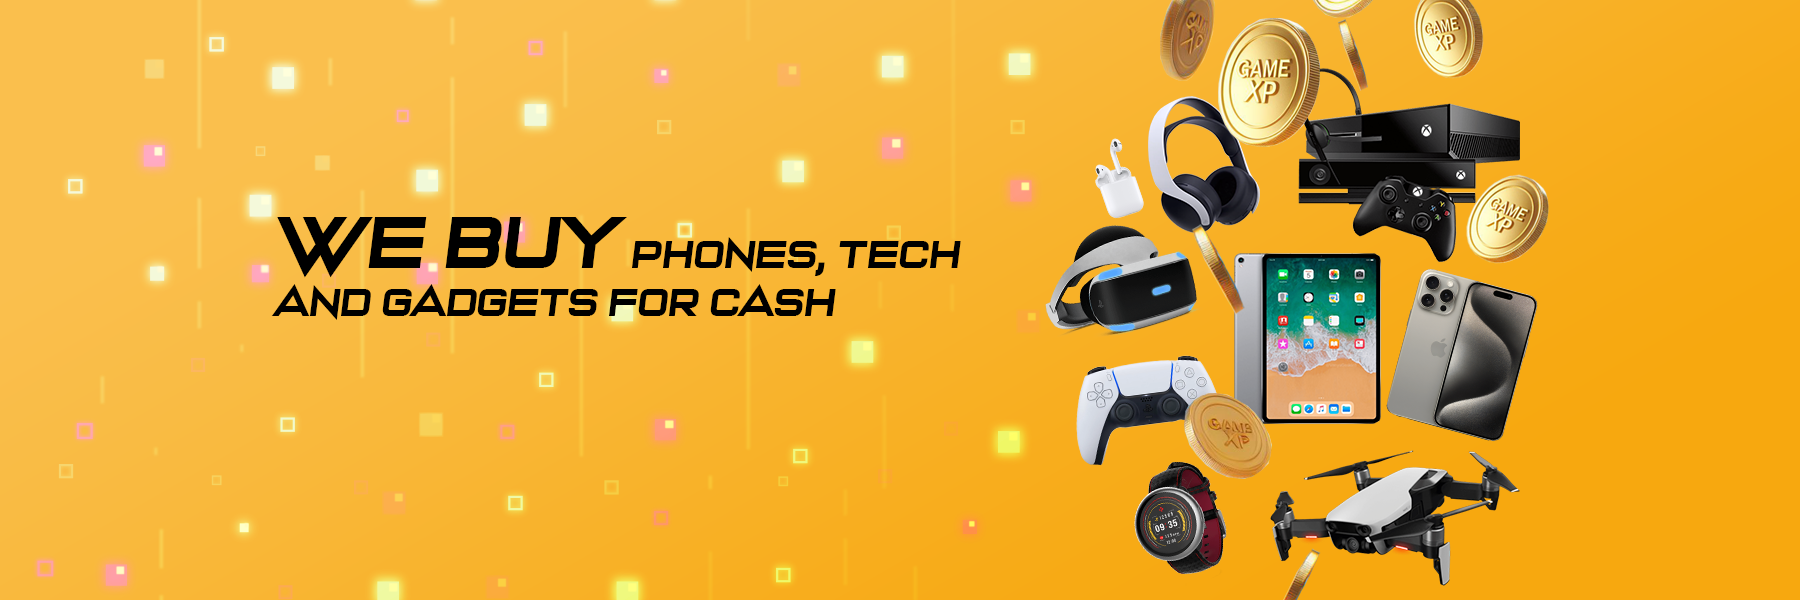 we buy and trade-in gadgets, phone and tech at gamexp